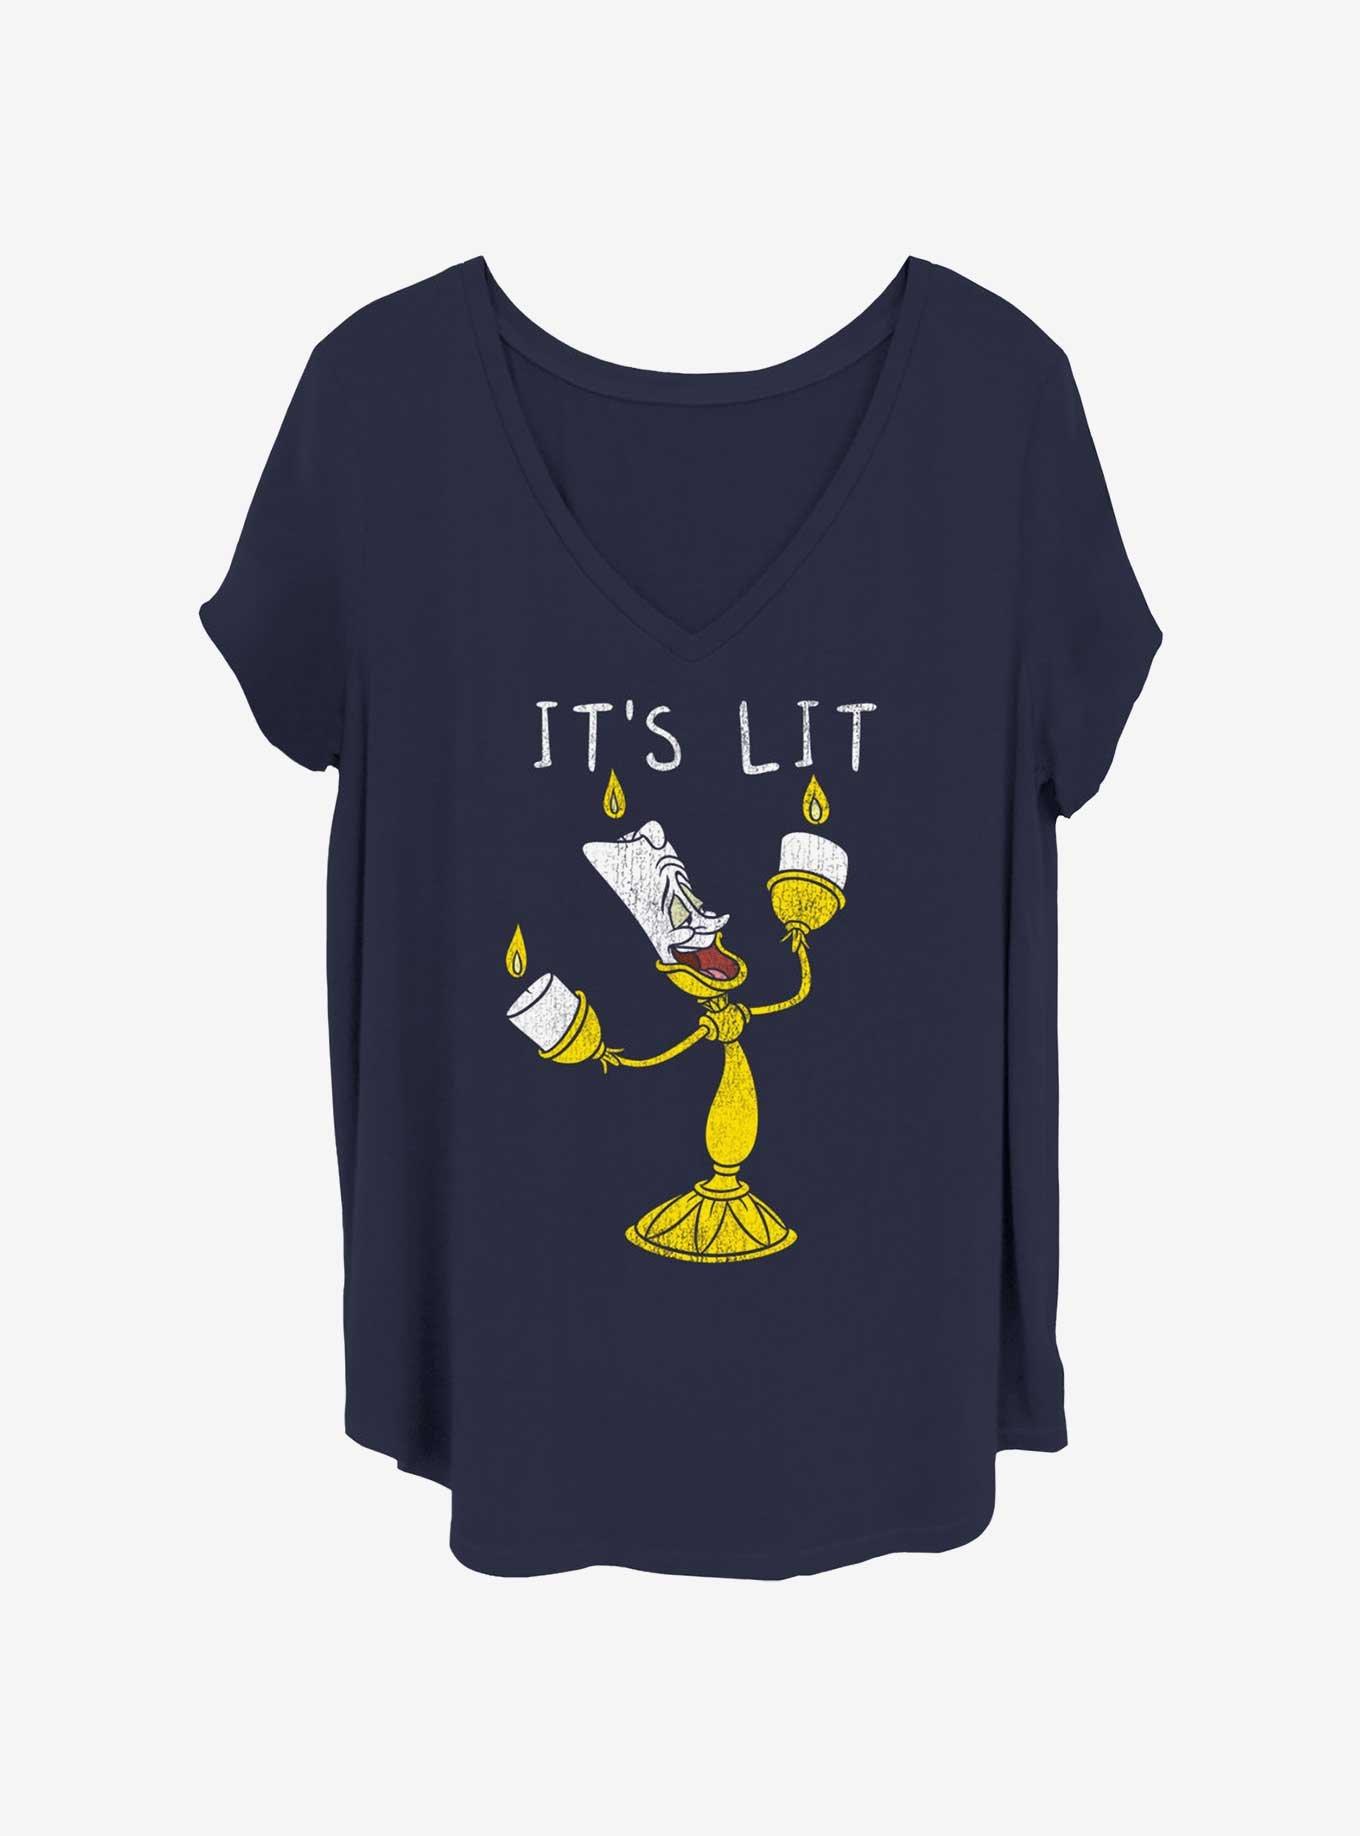 Disney Beauty and the Beast It's Lit Womens T-Shirt Plus Size, NAVY, hi-res